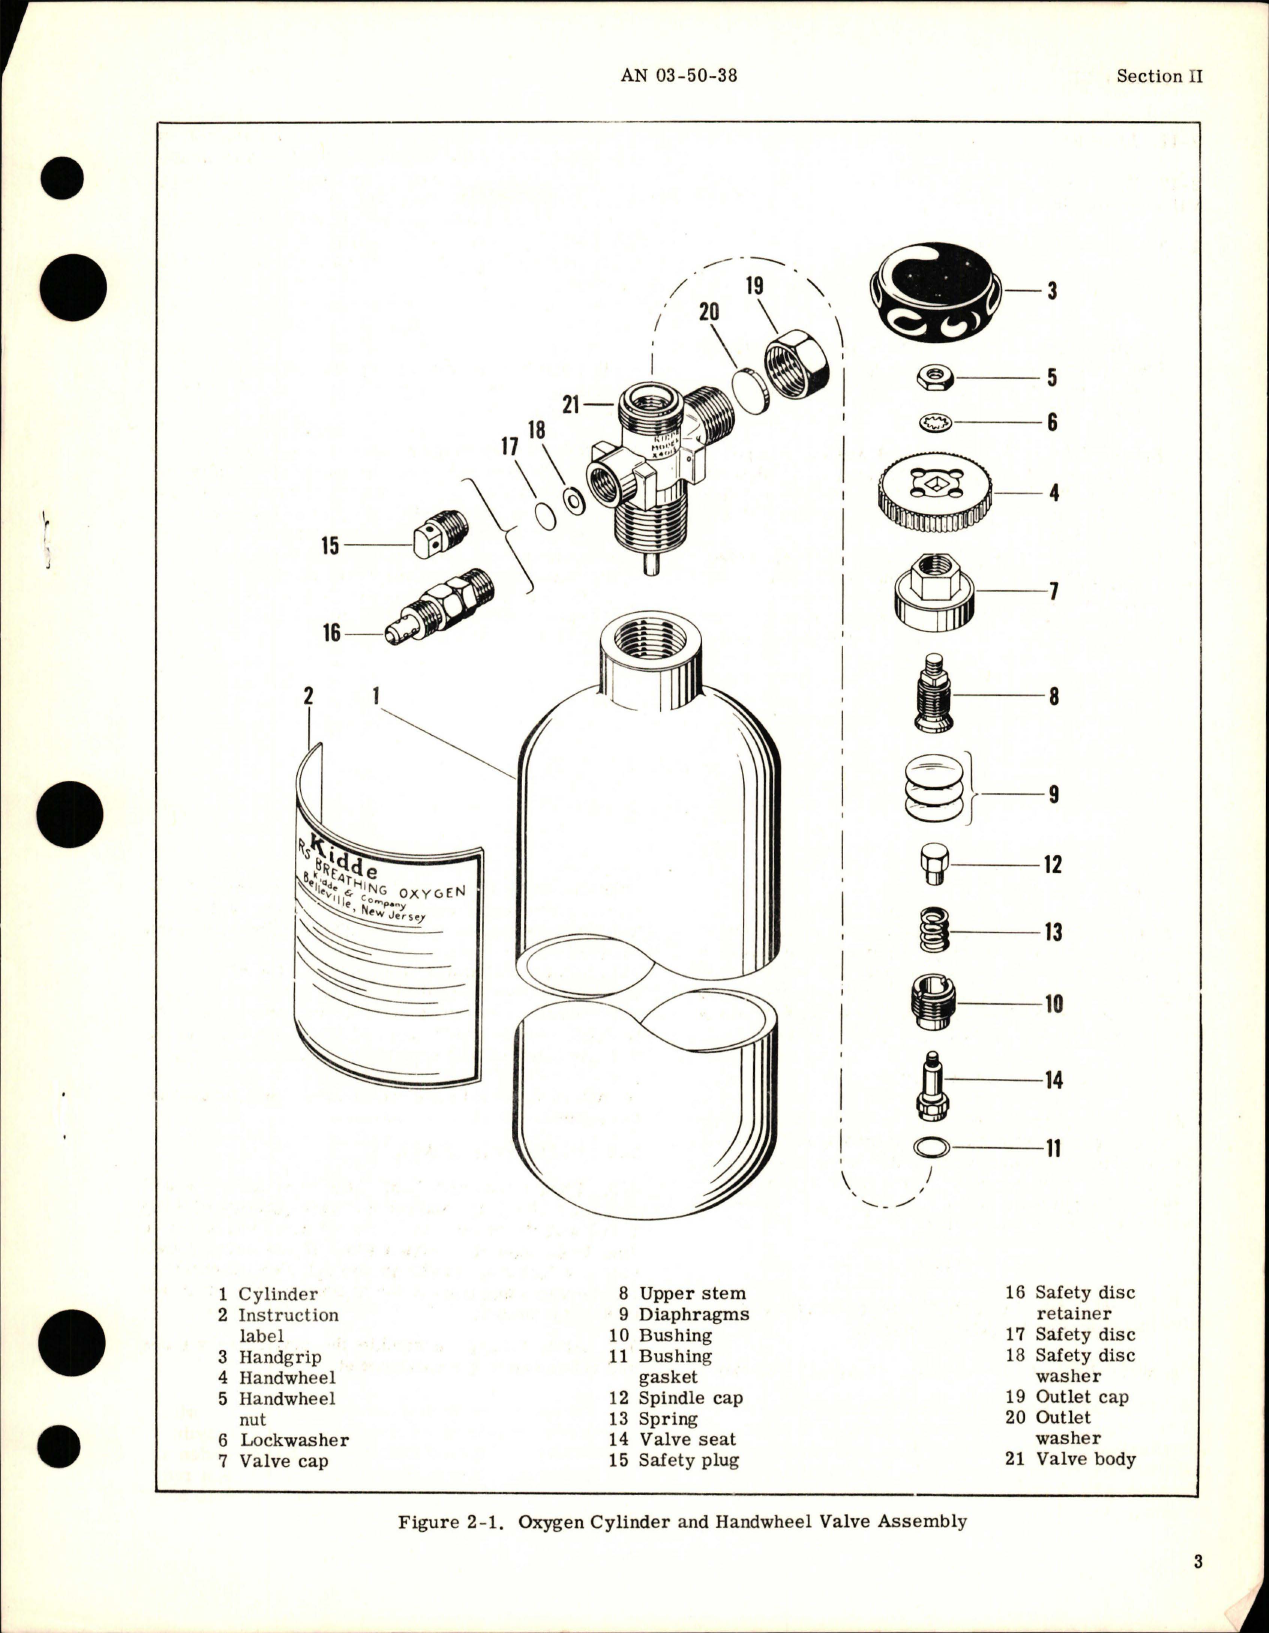 Sample page 5 from AirCorps Library document: Overhaul Instructions for Oxygen Cylinder and Handwheel Valve Assembly